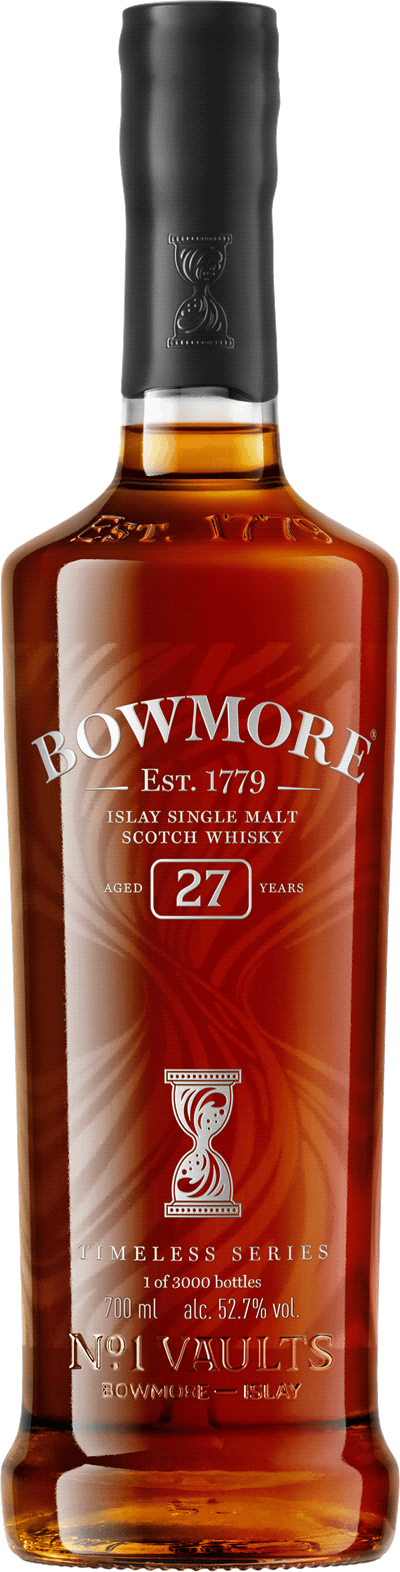 Bowmore Timeless Series 27 Years